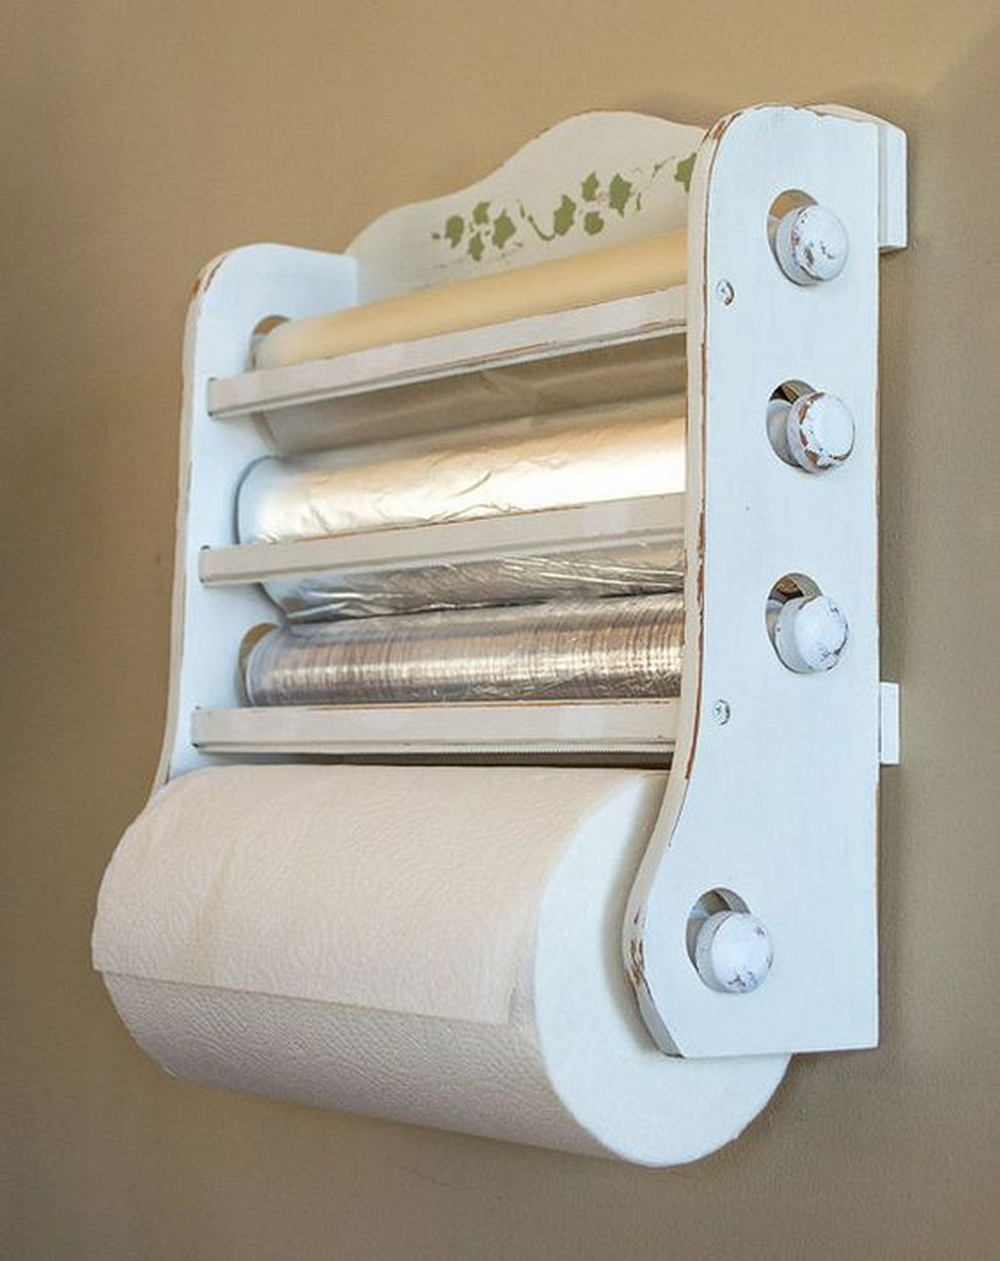 https://diyprojects.ideas2live4.com/wp-content/uploads/sites/5/2019/03/Multi-Kitchen-Roll-Holder-03.png